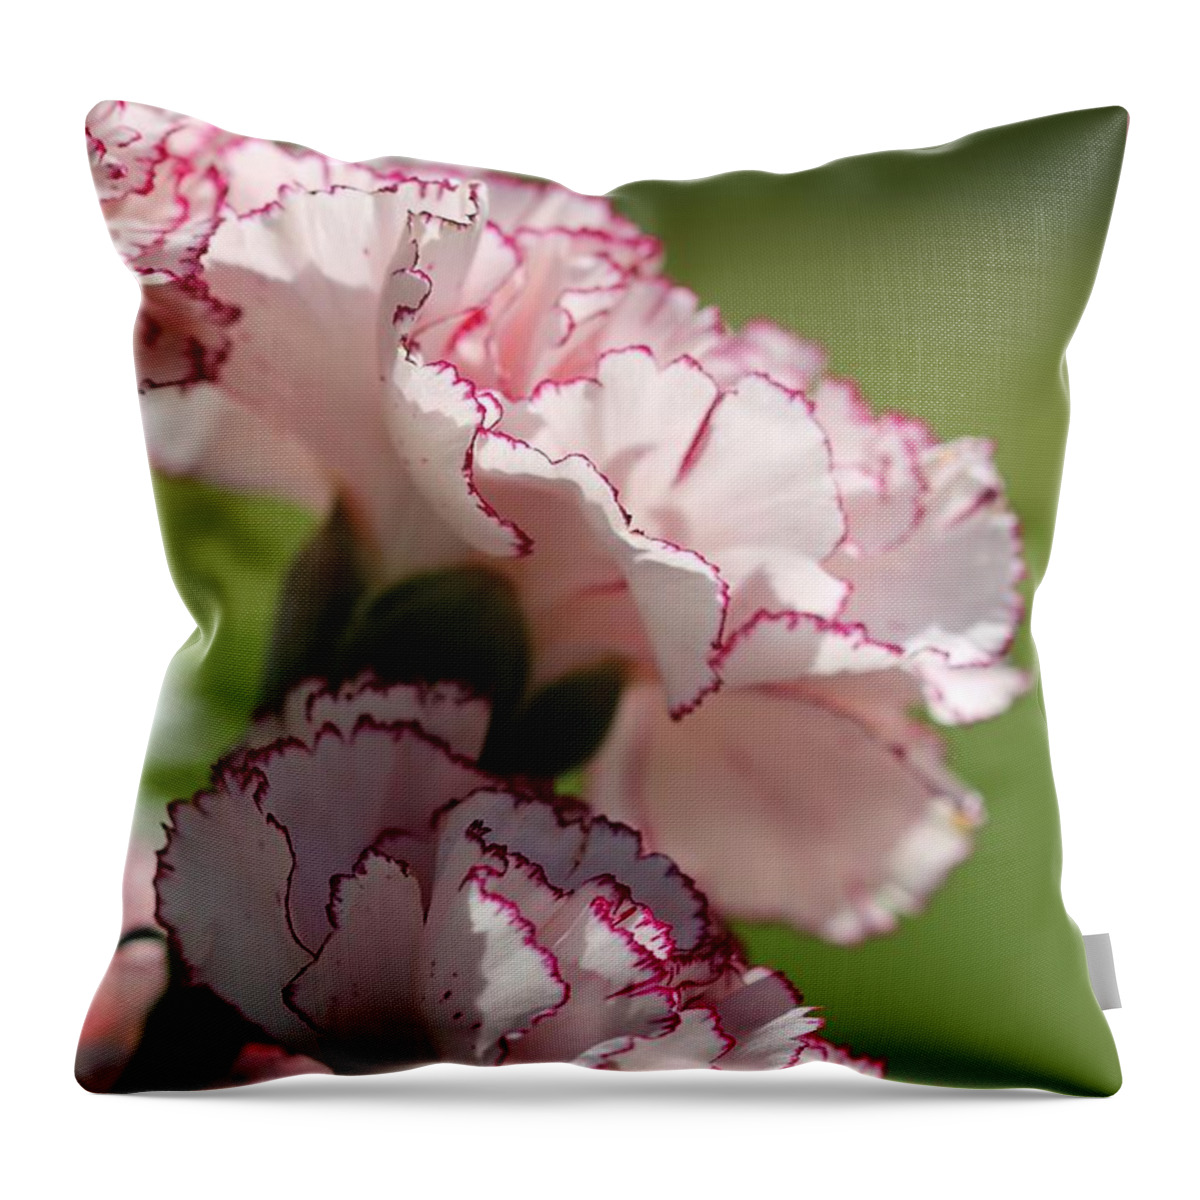 Mccombie Throw Pillow featuring the photograph Creamy White With Red Picotee Carnation by J McCombie